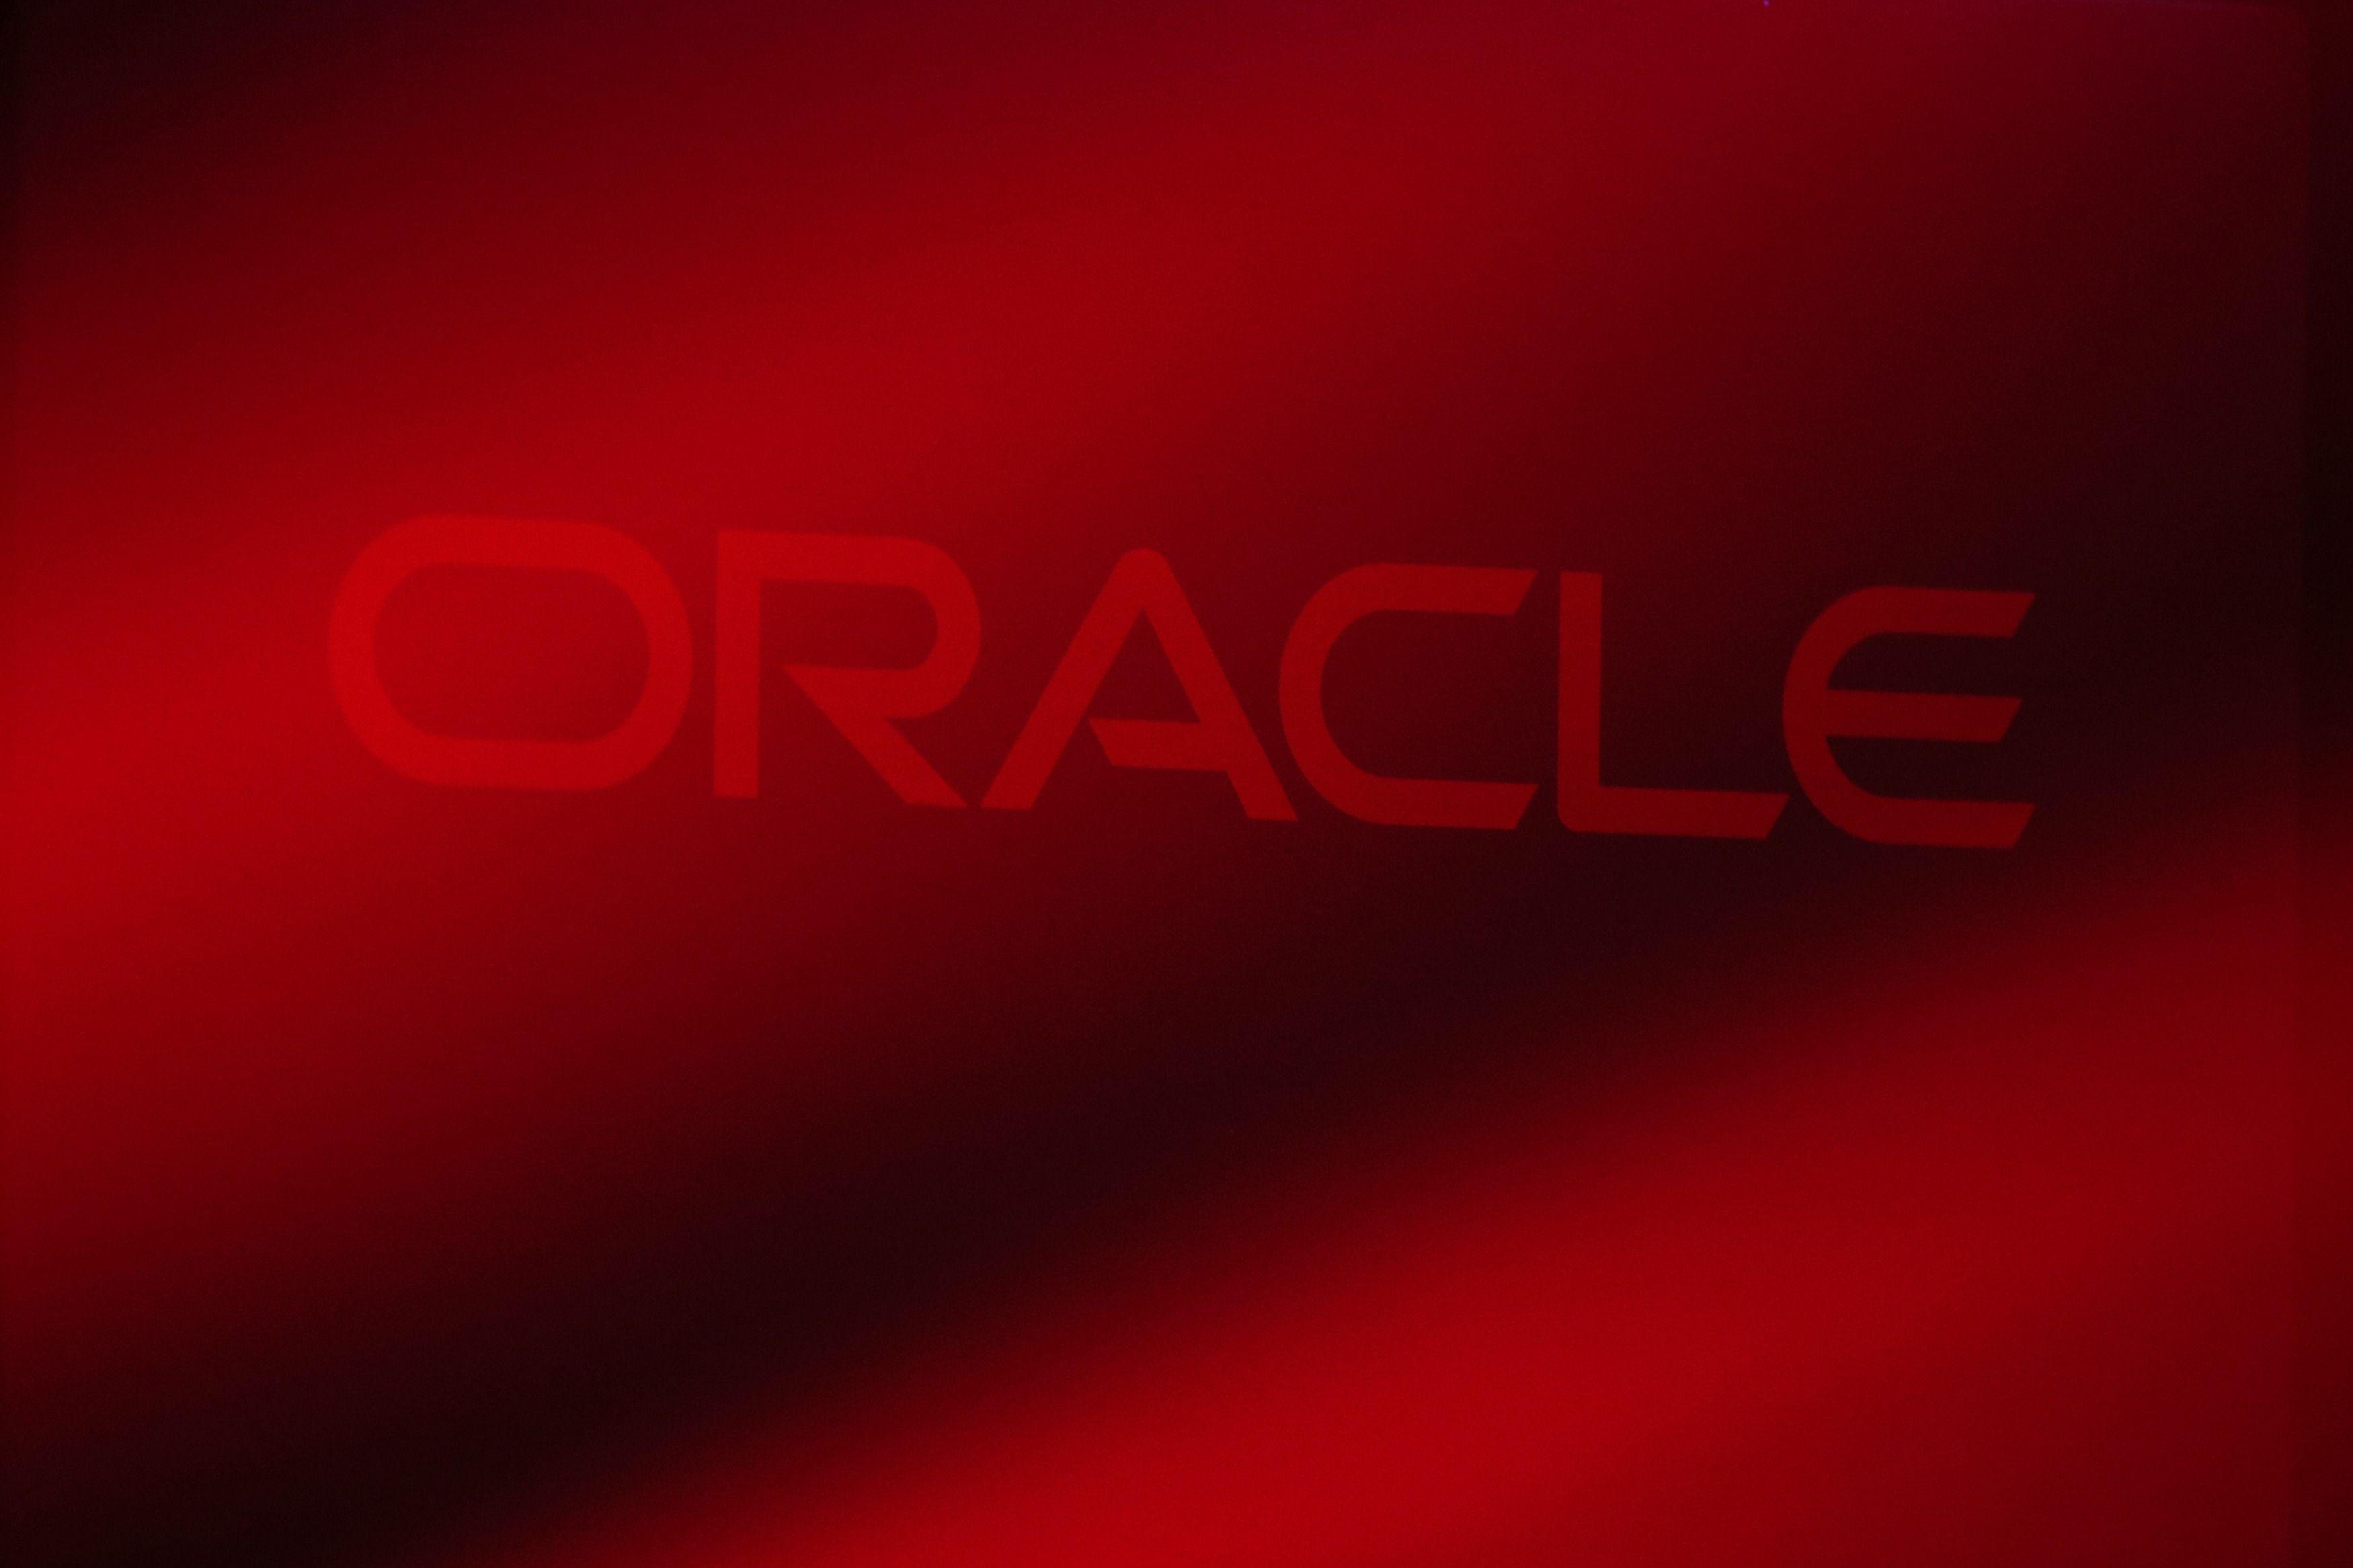 Oracle Wallpapers Top Free Oracle Backgrounds Wallpaperaccess